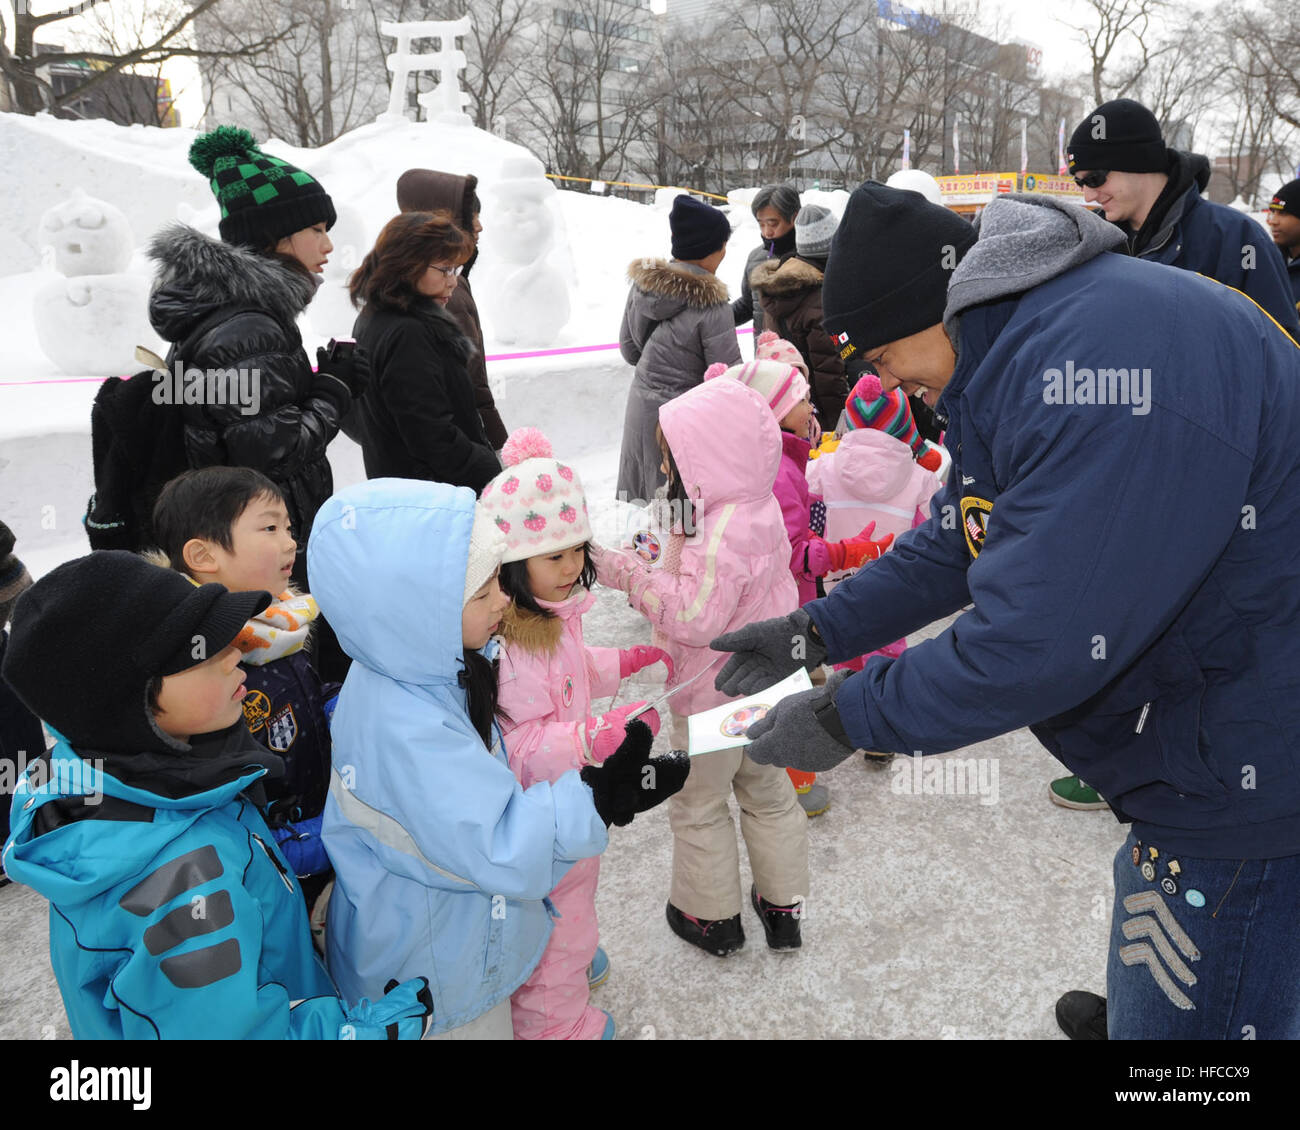 Petty Officer 2nd Class Tywan Ballard, an aviation electronics technician,  hands out Manga comic books to children attending the 62nd Annual Sapporo Snow Festival. Ballard and other members of the Misawa Navy Snow Team are in Sapporo representing their commands at Naval Air Facility Misawa, Japan. This is the 28th year the base sent a team to the northern Japanese city to create a snow sculpture and interact with the local populace. The Mangas commemorate the 50th Anniversary of the Treaty of Mutual Cooperation and Security between the United States and Japan. Misawa Navy Snow Team Meet with  Stock Photo